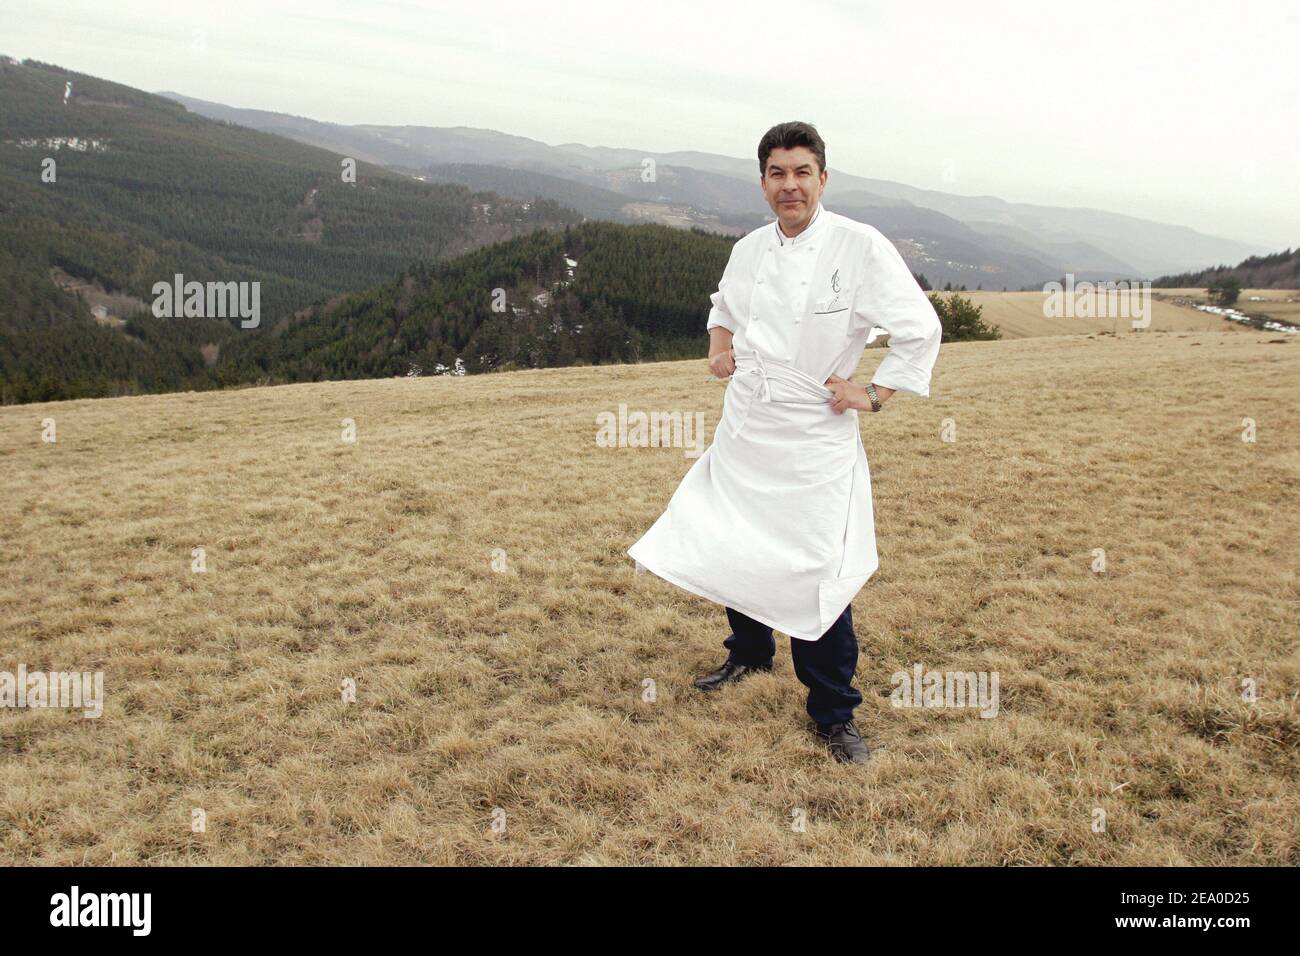 EXCLUSIVE. French Three Star Chef Regis Marcon poses outside his restaurant 'Le Clos des Cimes' in Saint-Bonnet-le-Froid, central France, on March 22, 2005, after he received his third star awarded by the Guide Michelin in its 2005 edition. Photo by Alexis Orand/ABACA. Stock Photo